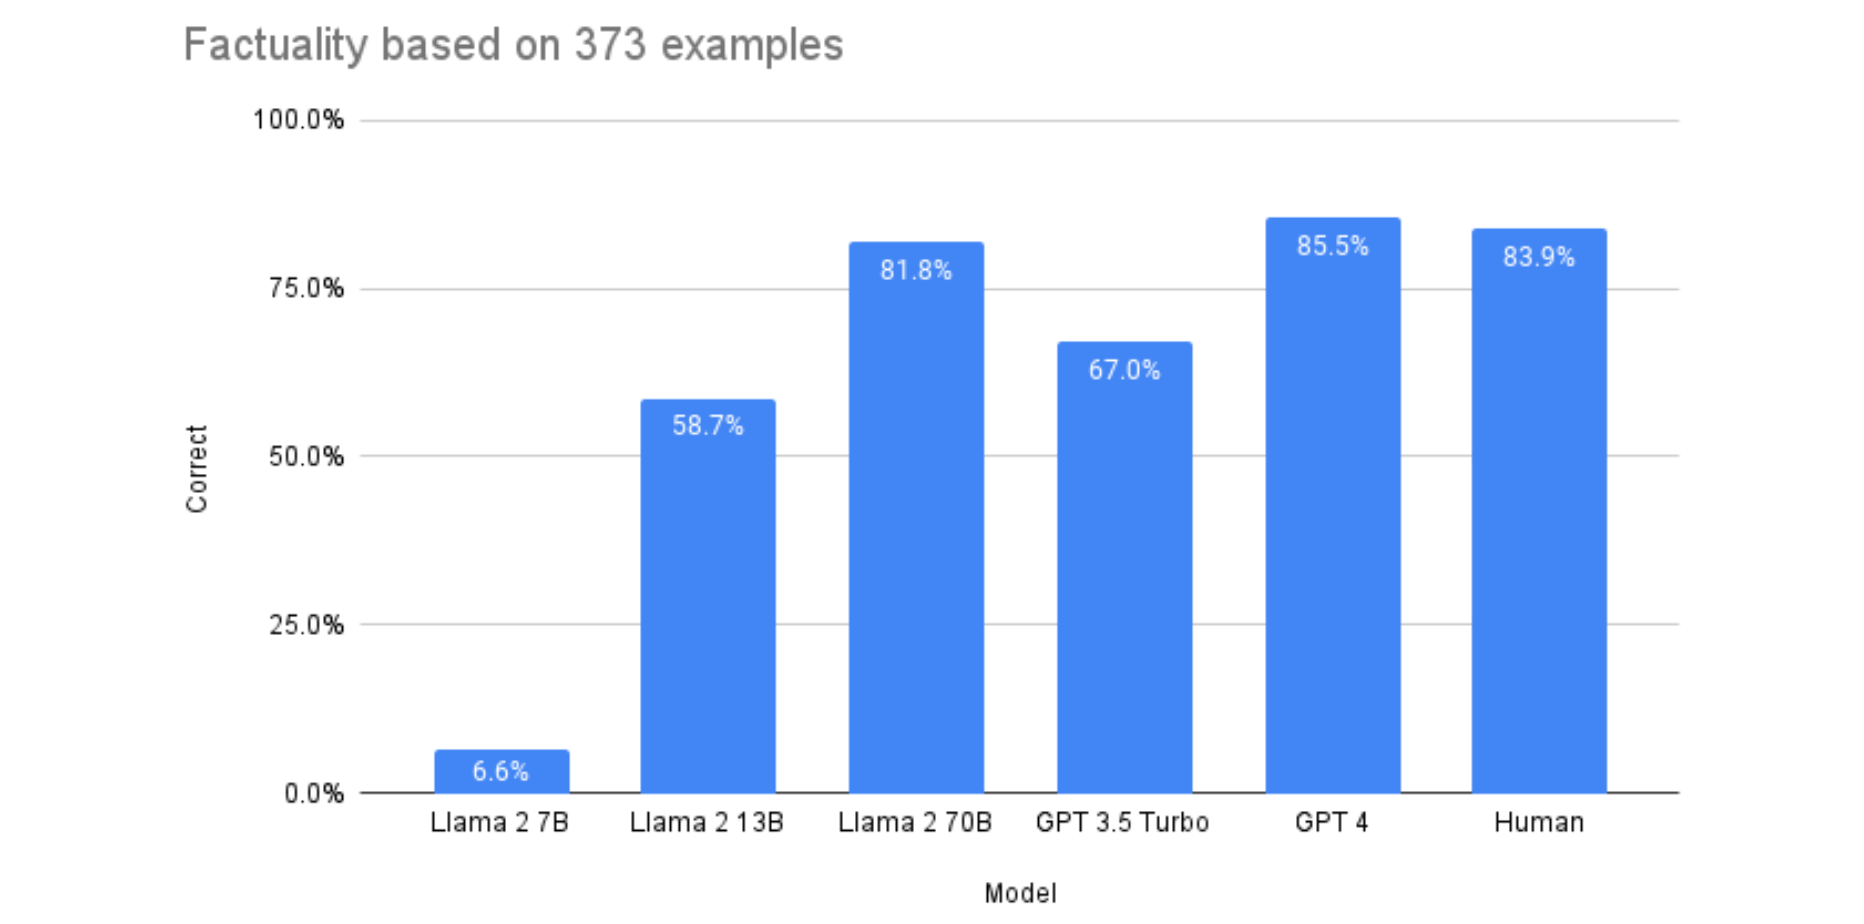 Llama 2 is about as factually accurate as GPT-4 for summaries and ...